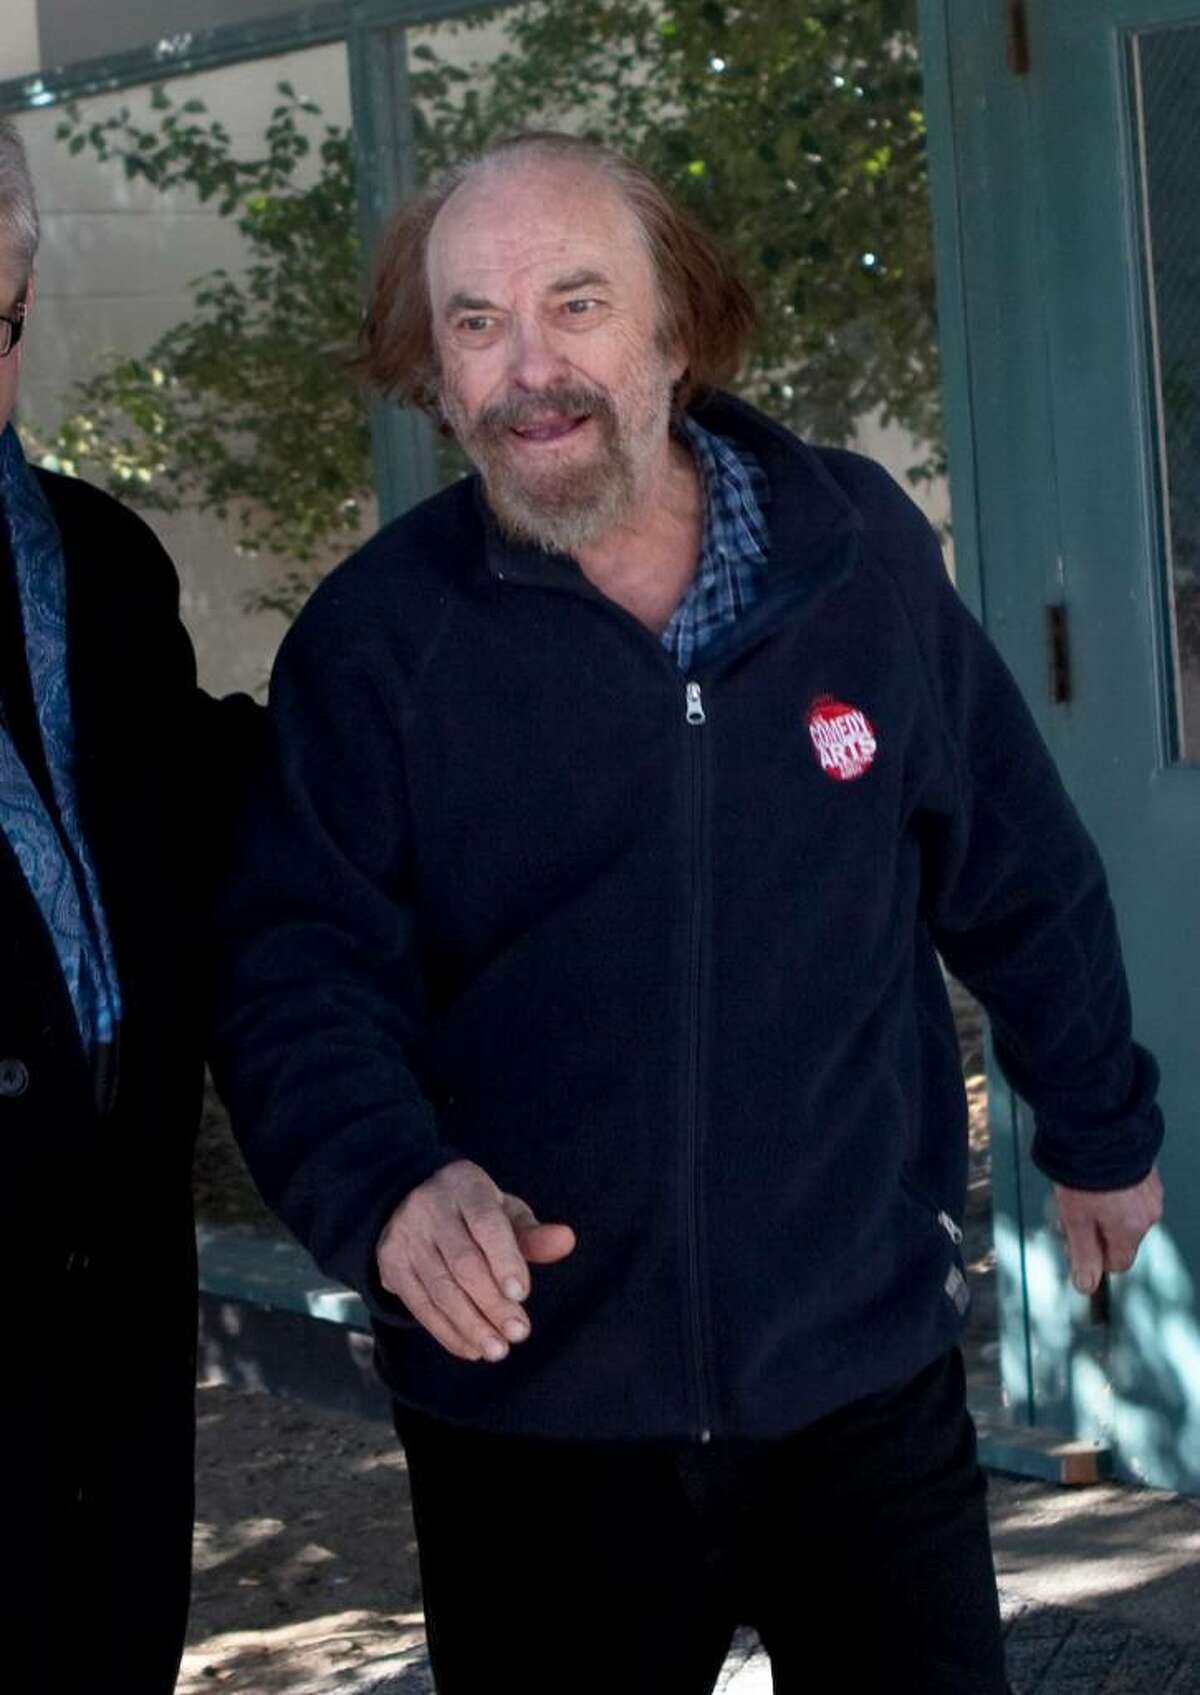 BANTAM, CT - FEBRUARY 1: Actor Rip Torn exits Bantam Superior Court February 1, 2010 in Bantam, Connecticut. Torn was arraigned on charges of criminal trespass, carrying a gun without a permit, carrying a gun while intoxicated, burglary and criminal mischief and was released on a $100,000 bond. Police responding to an alarm found Torn in the Litchfield Bancorp branch's lobby Friday night after he reportedly broke into the bank though a window while intoxicated. (Photo by Wendy Carlson/Getty Images) *** Local Caption *** Rip Torn